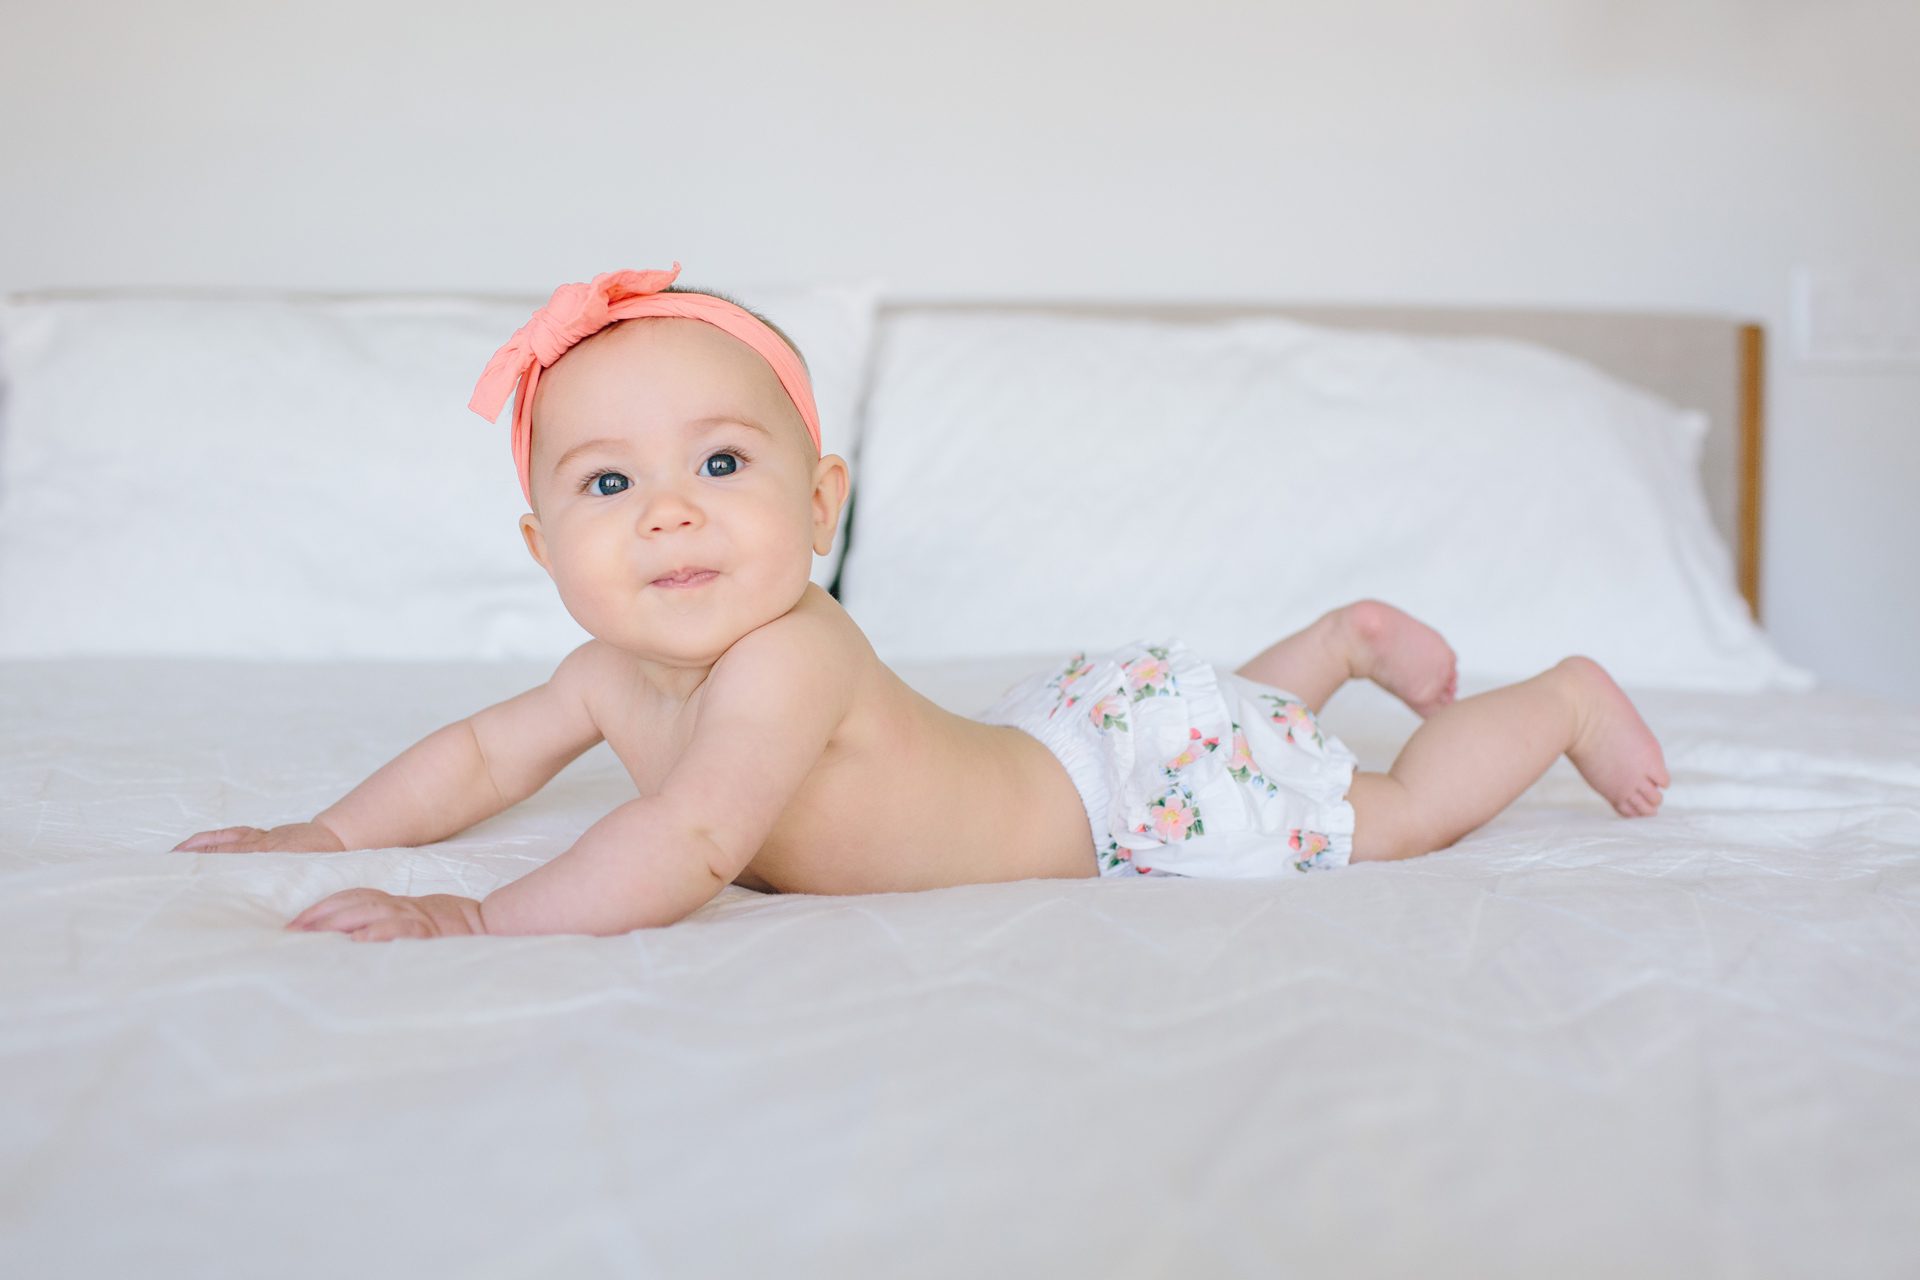 6 month baby photos, six month photos, denver family photographer, denver baby photographer, child photographer, tess polivka photography, colorado photographer, in home session, natural light, baby, six month baby, 6 months